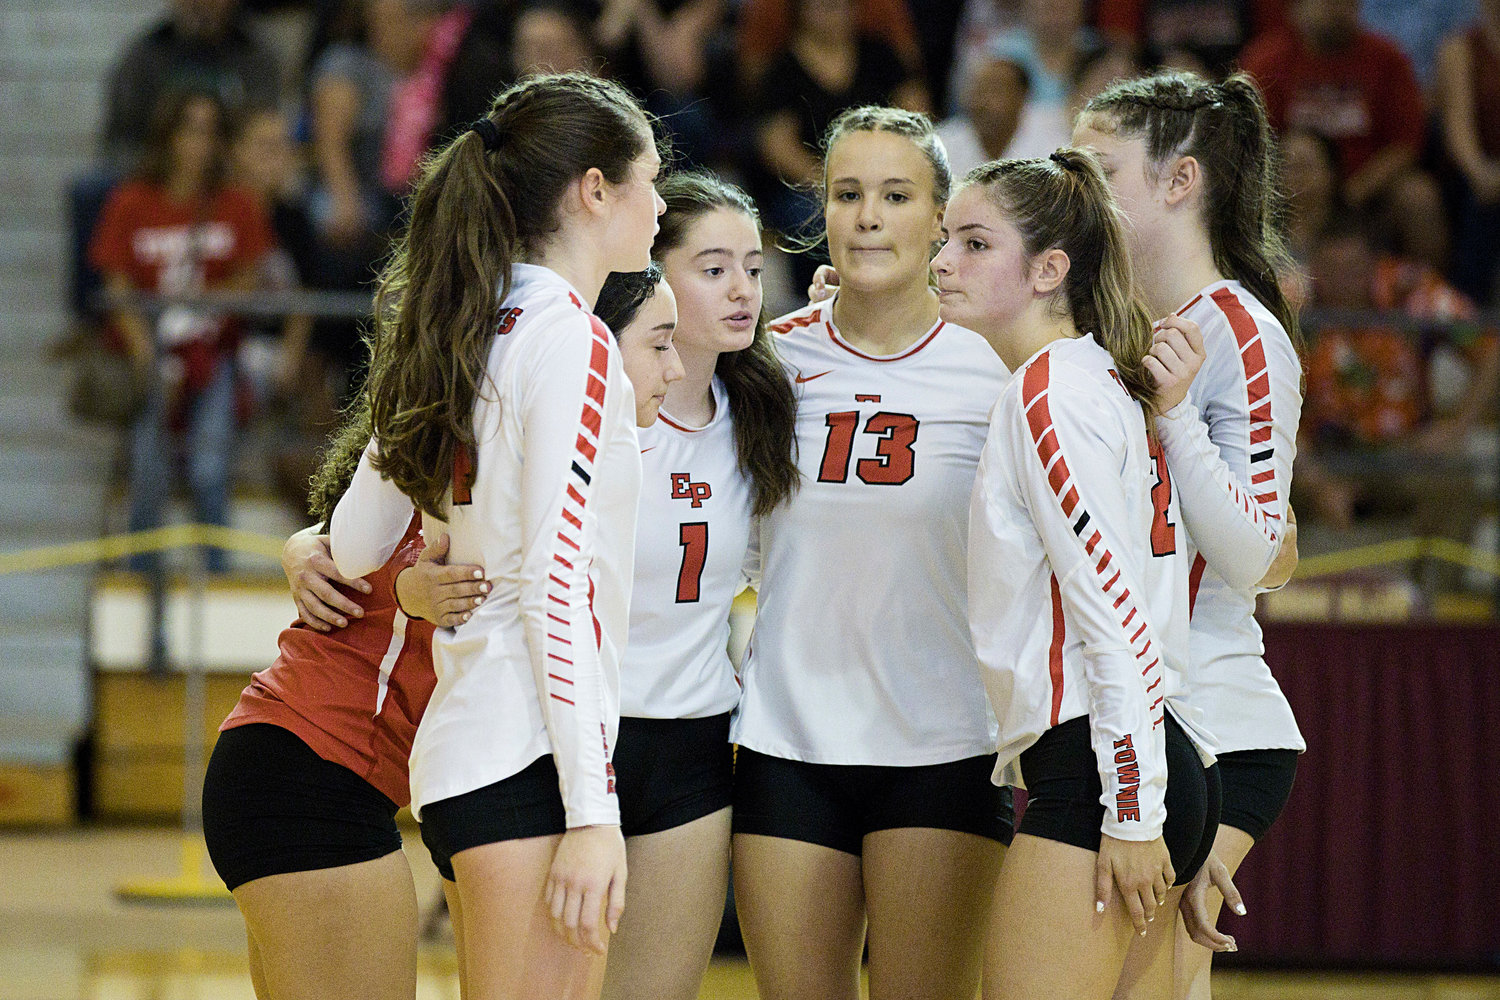 East Providence High School girls' volleyball players leave the court following their 3-0 loss to Chariho in the Division II title match Saturday, Nov. 12, at Rhode Island College.